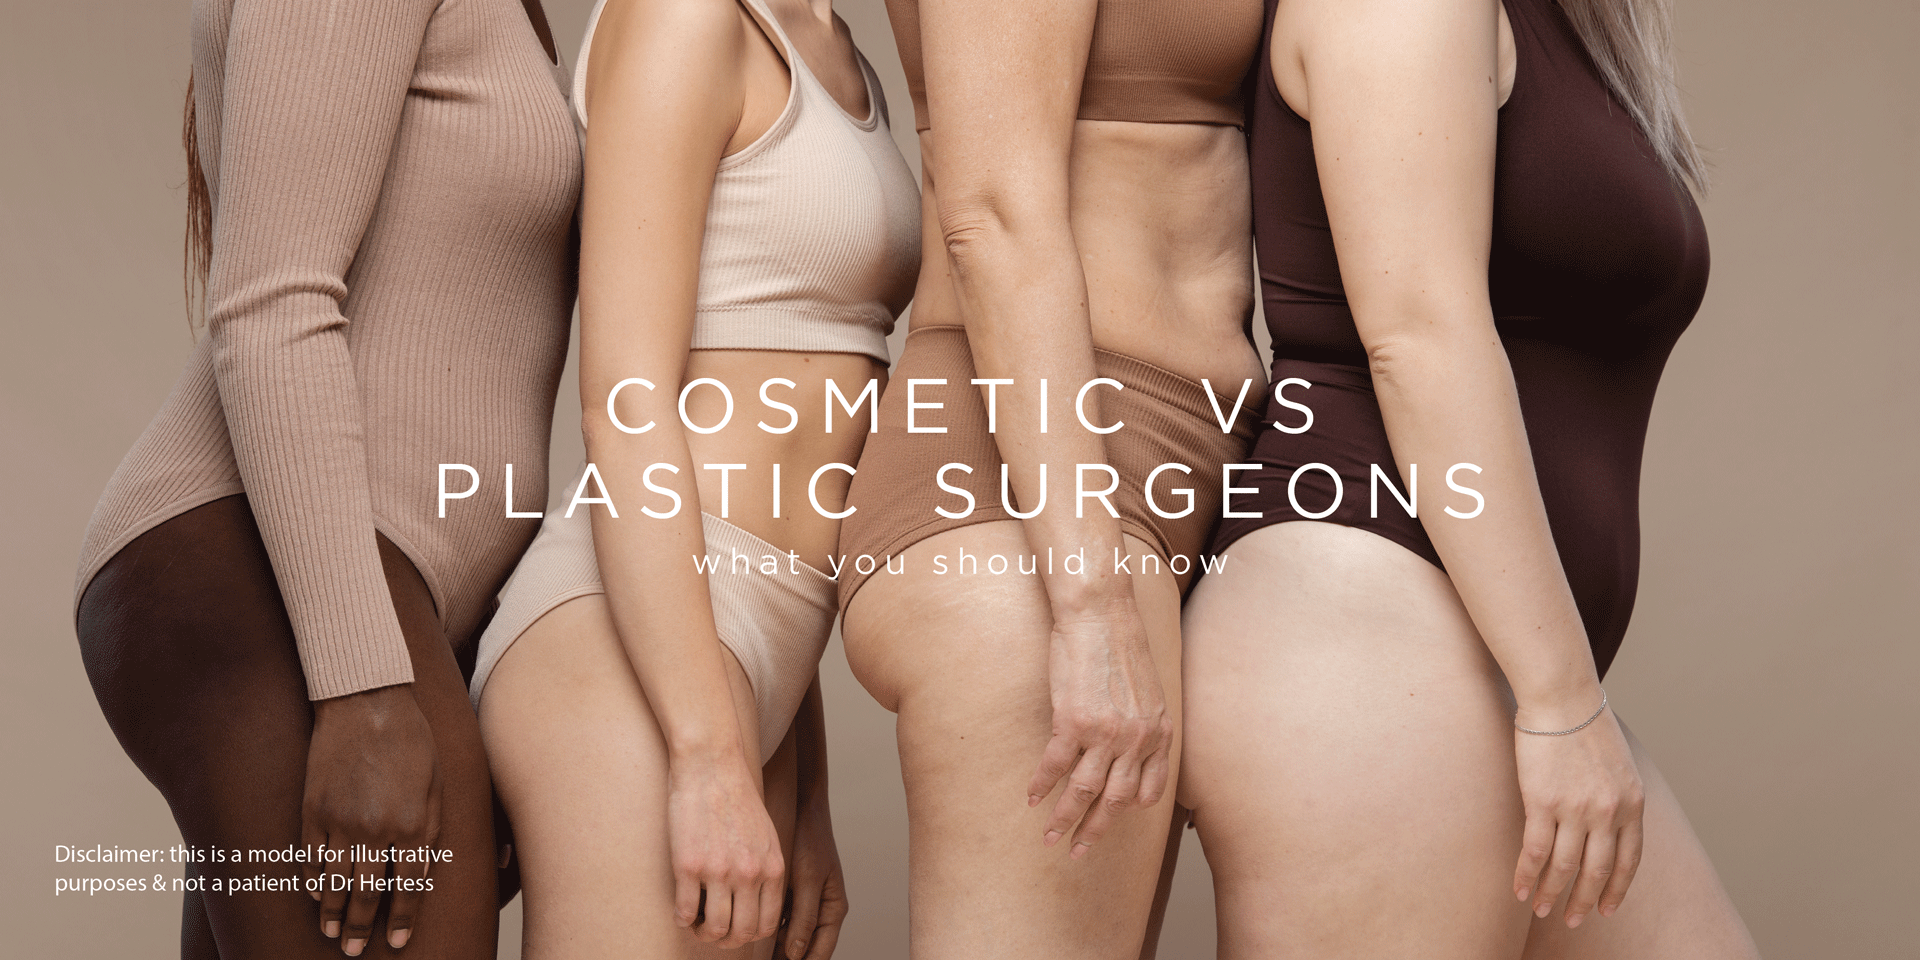 What's the difference between a Cosmetic and Plastic surgeon? Find out here.